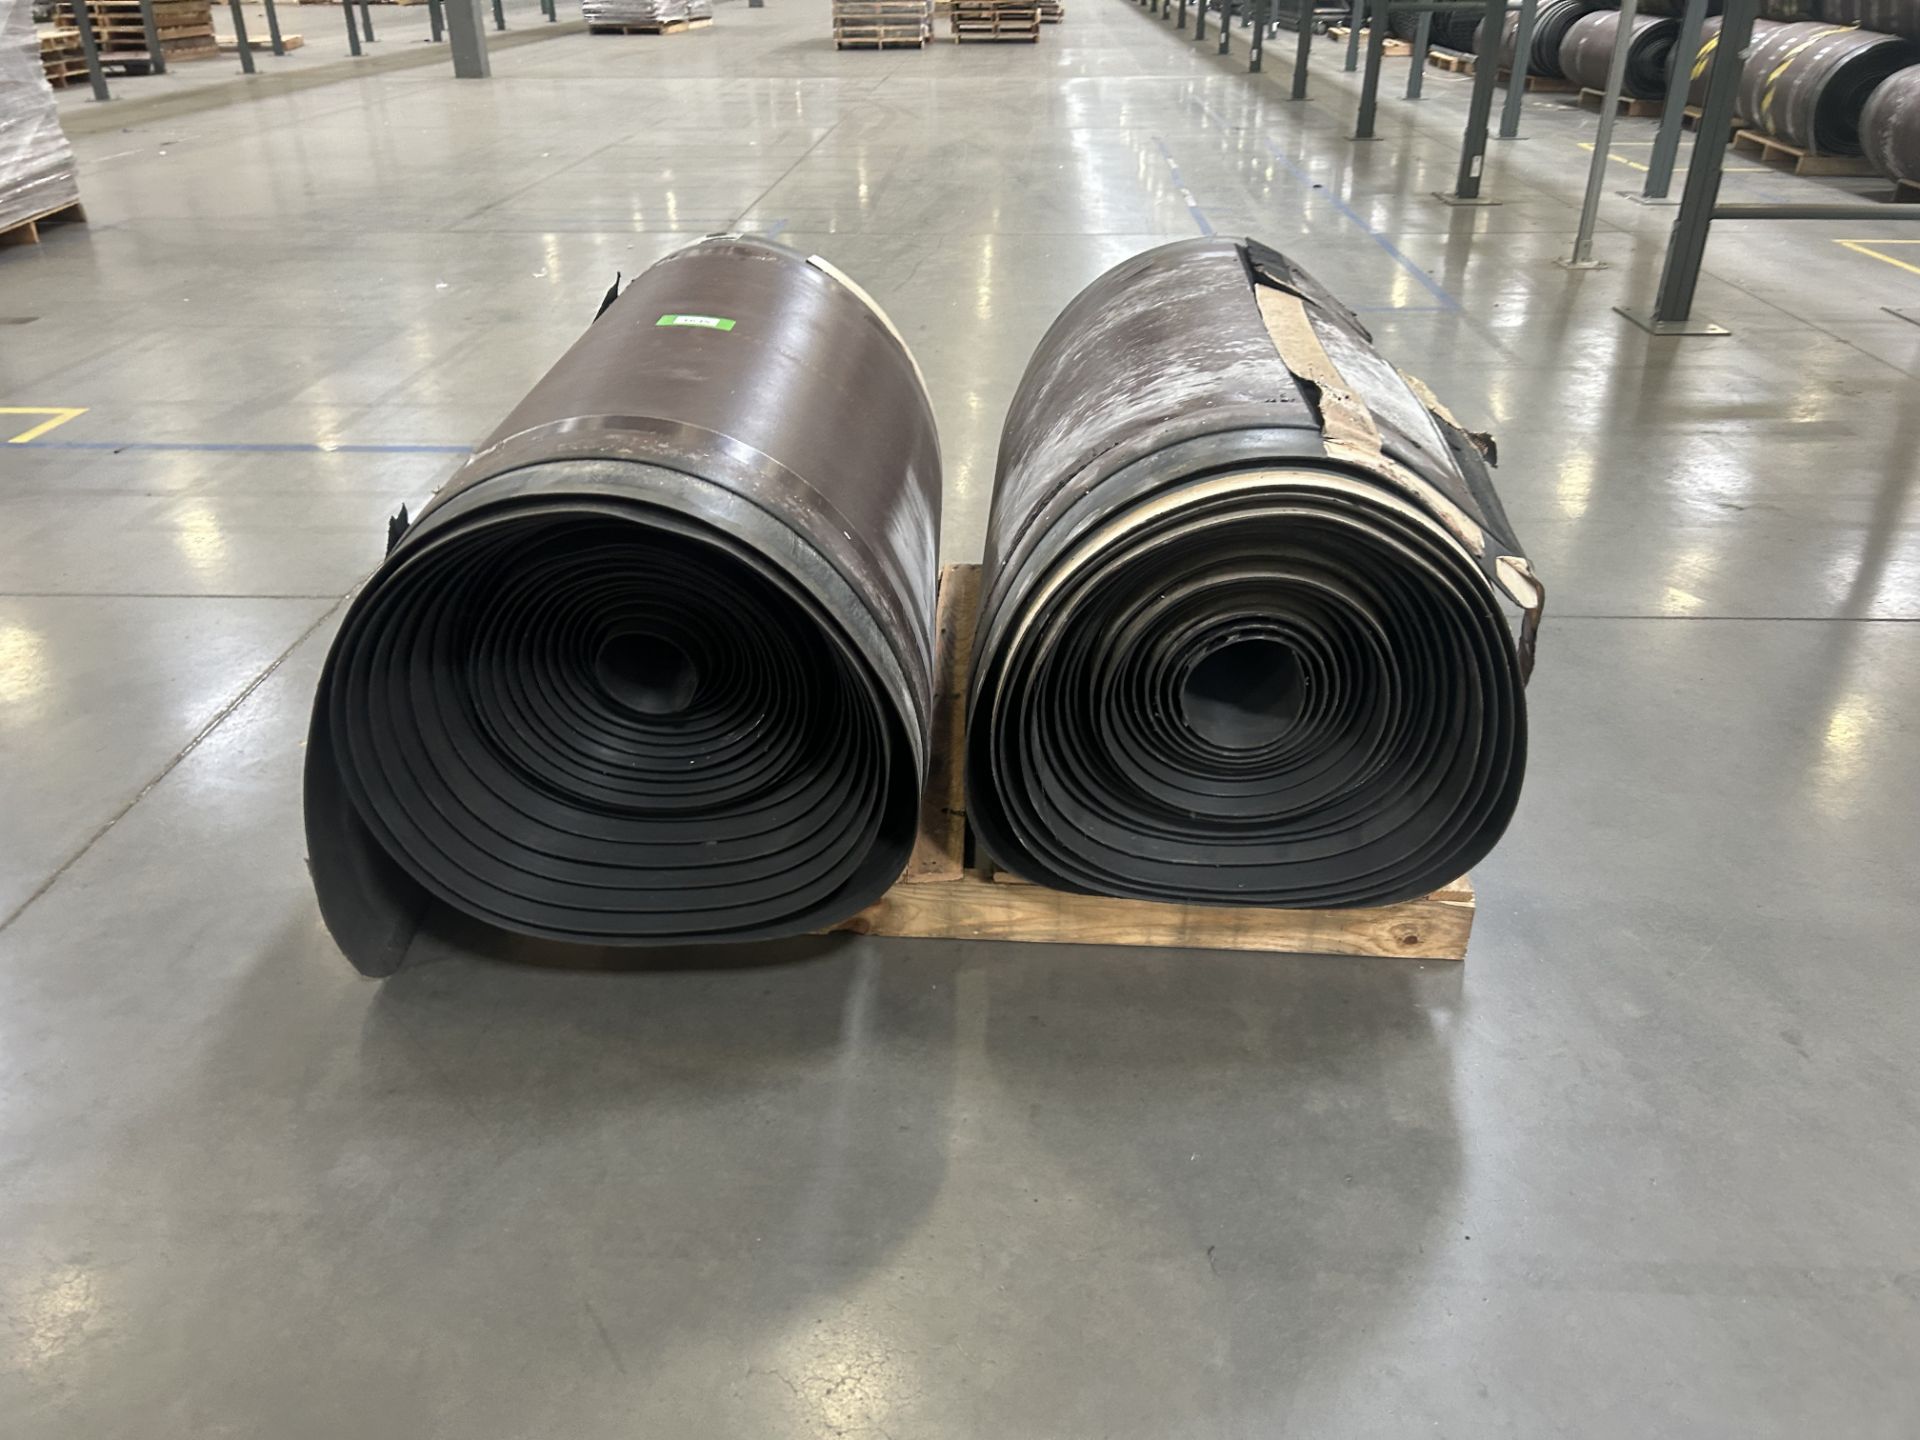 2 Anti-Fatigue Mats rolled